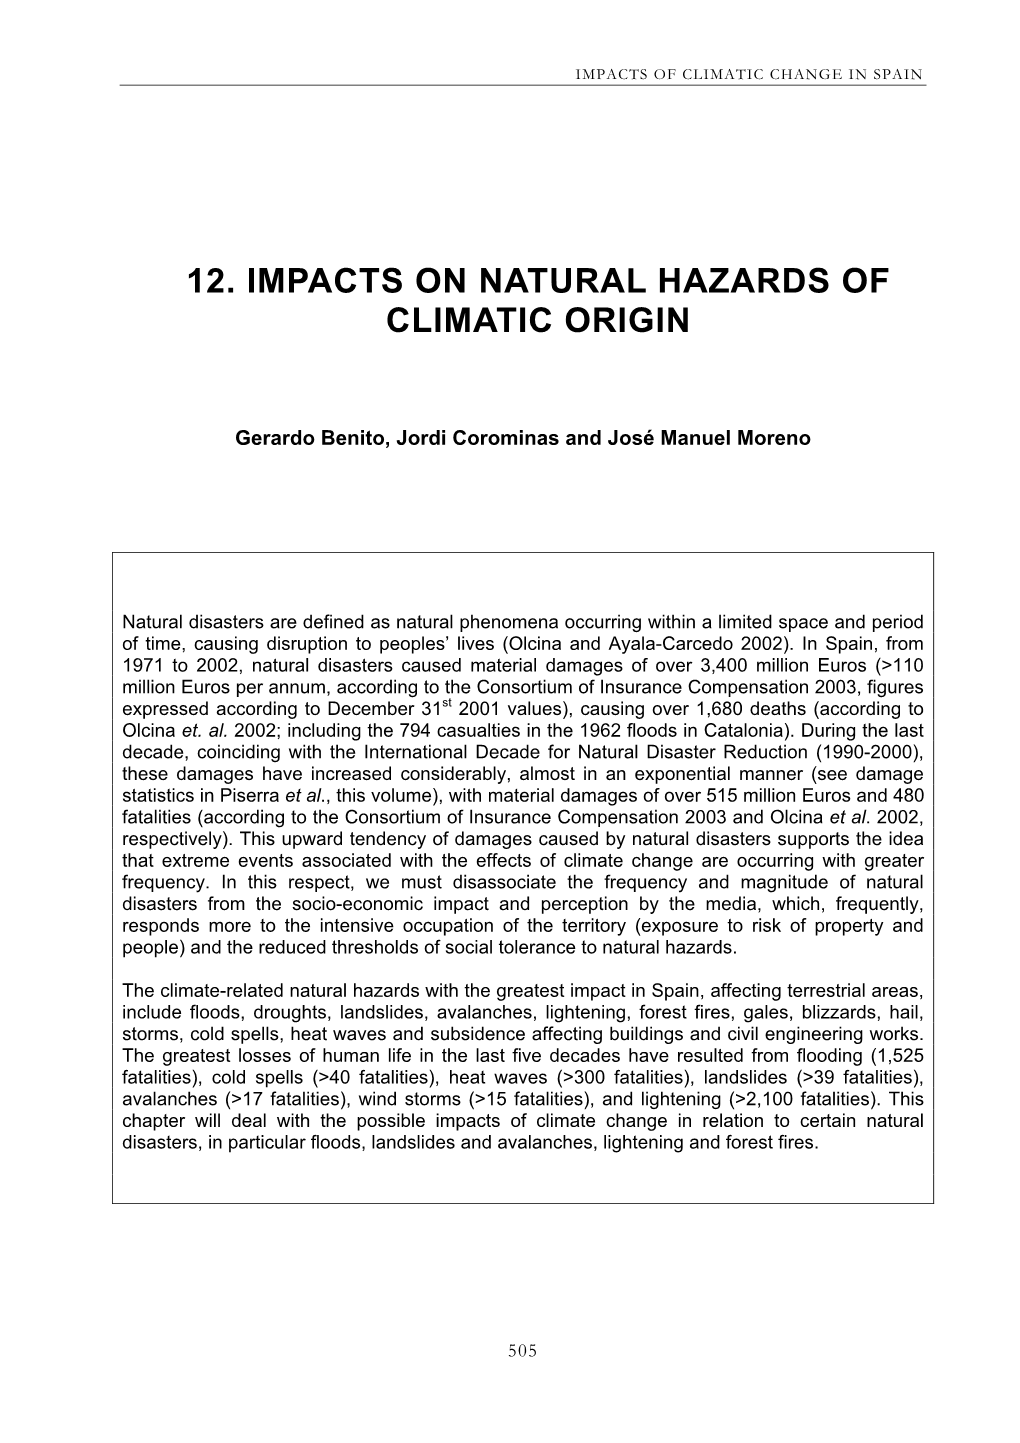 12. Impacts on Natural Hazards of Climatic Origin